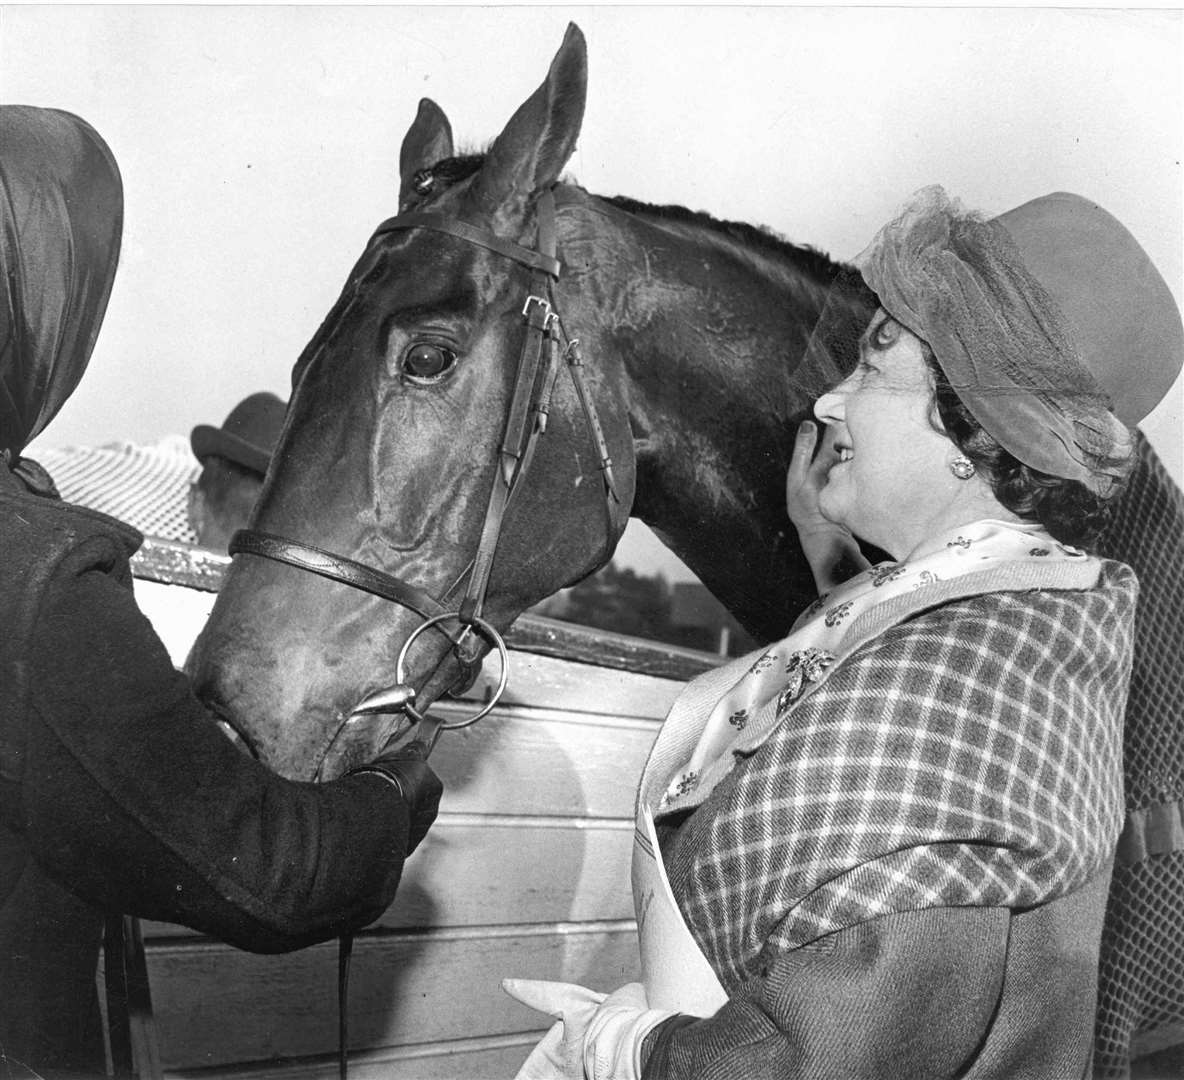 The Queen Mother paid a number of visits to Folkestone Races, including here in November 1964. She made a surprise visit to a National Hunt meeting at which her horse Arch Point, ridden by Bill Rees, won the opening race, the Marden Hurdle. 'I've had a wonderful afternoon,' the Queen Mother told the crowd